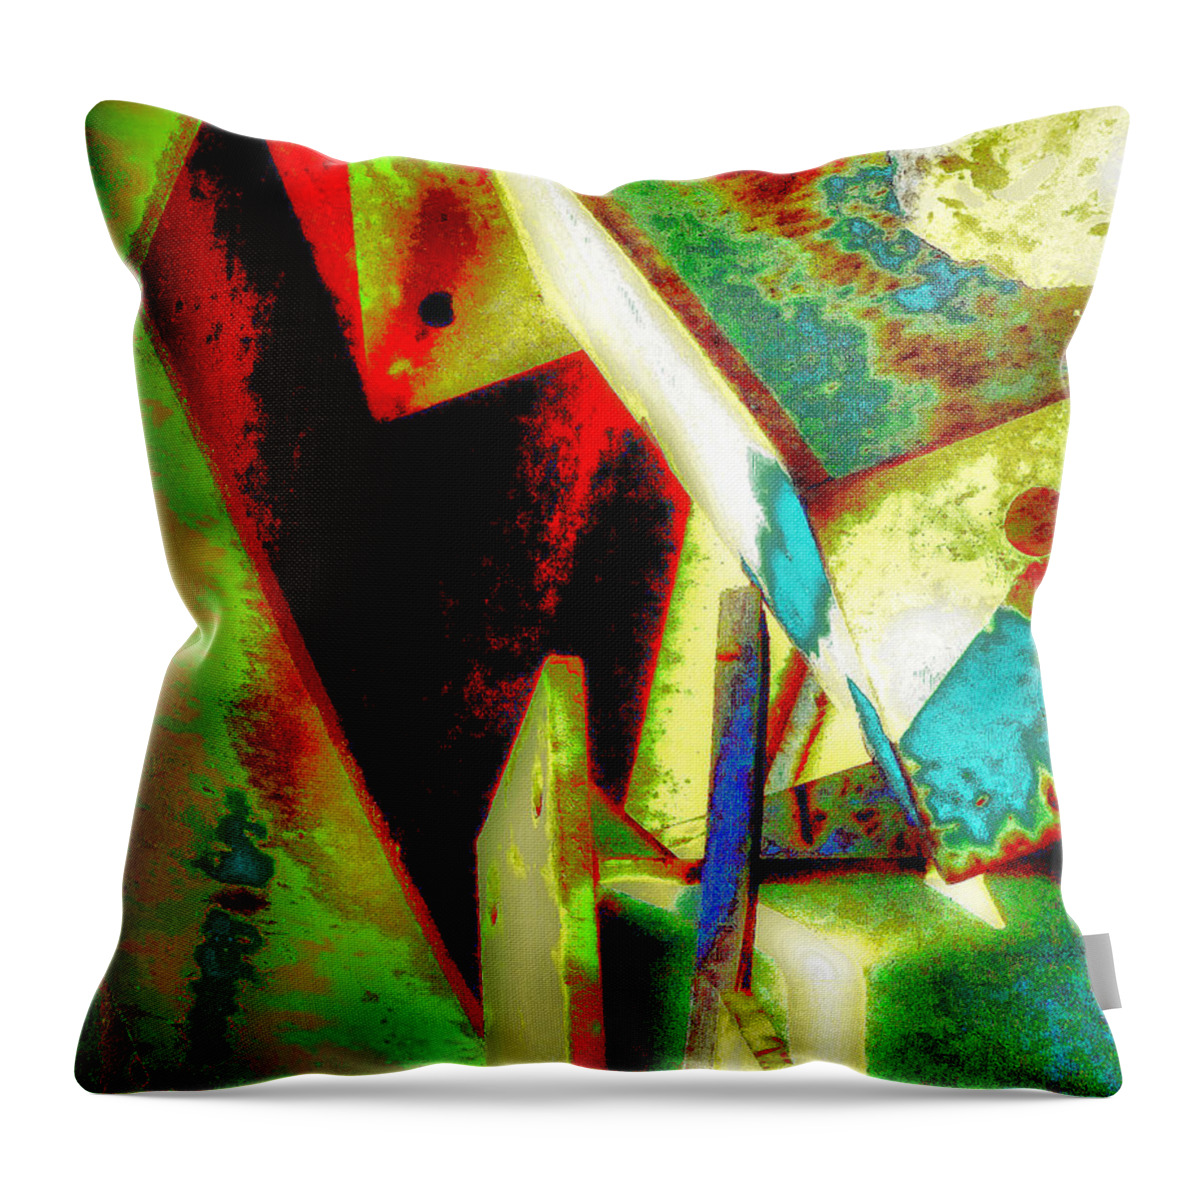  Throw Pillow featuring the photograph Old Photo New Vision #1 by Bradford Turner